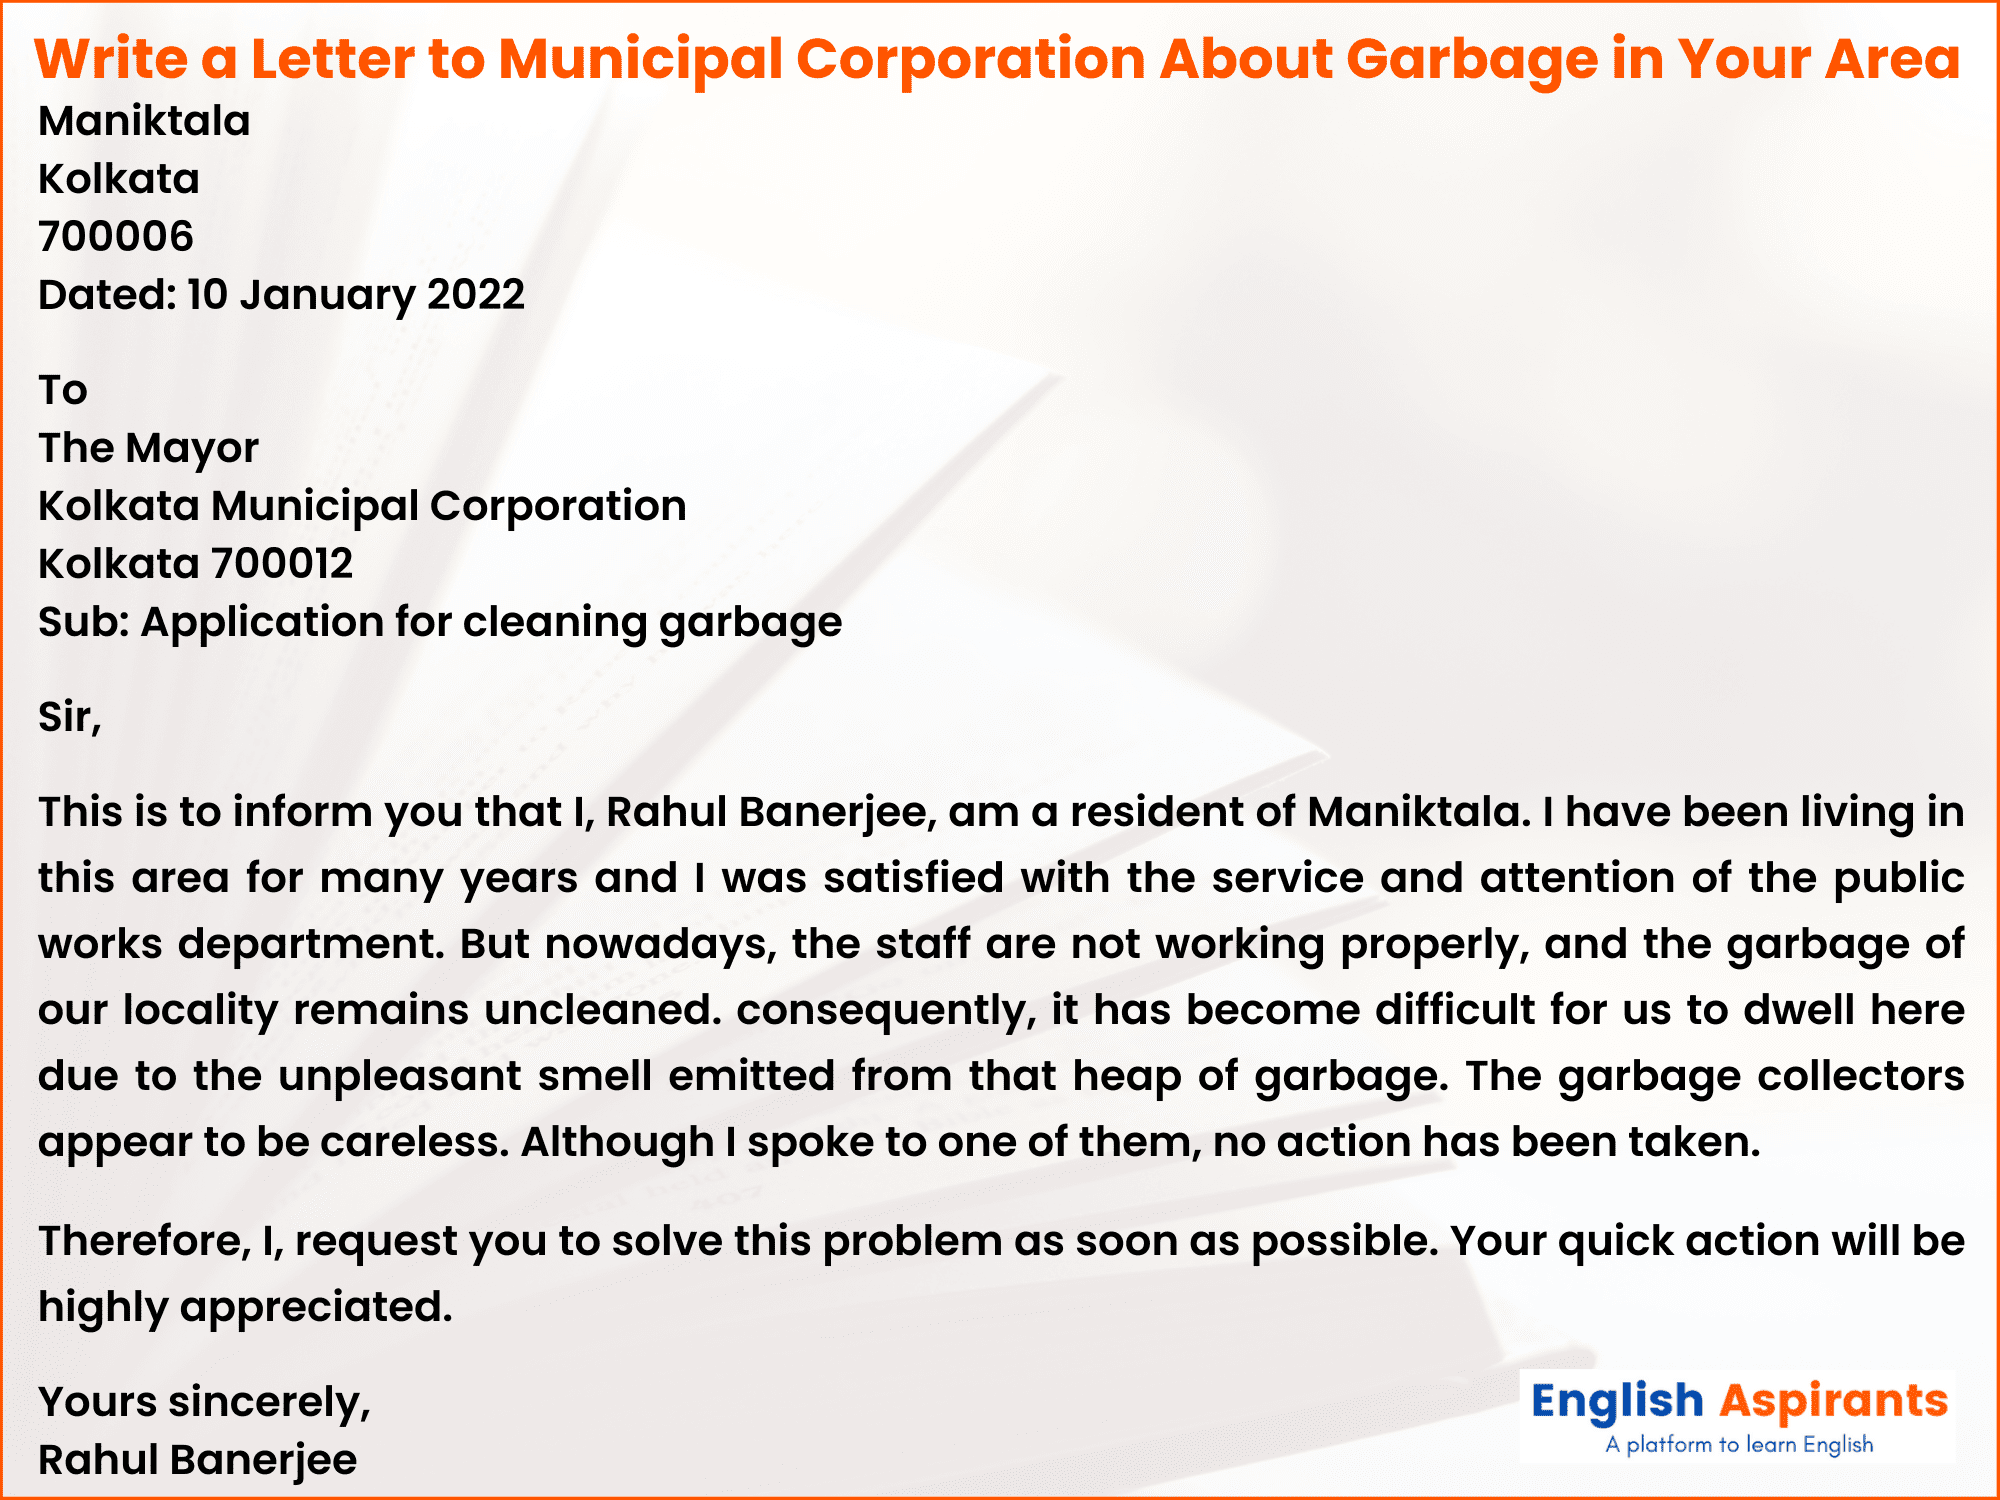 Write a Letter to Municipal Corporation About Garbage in English